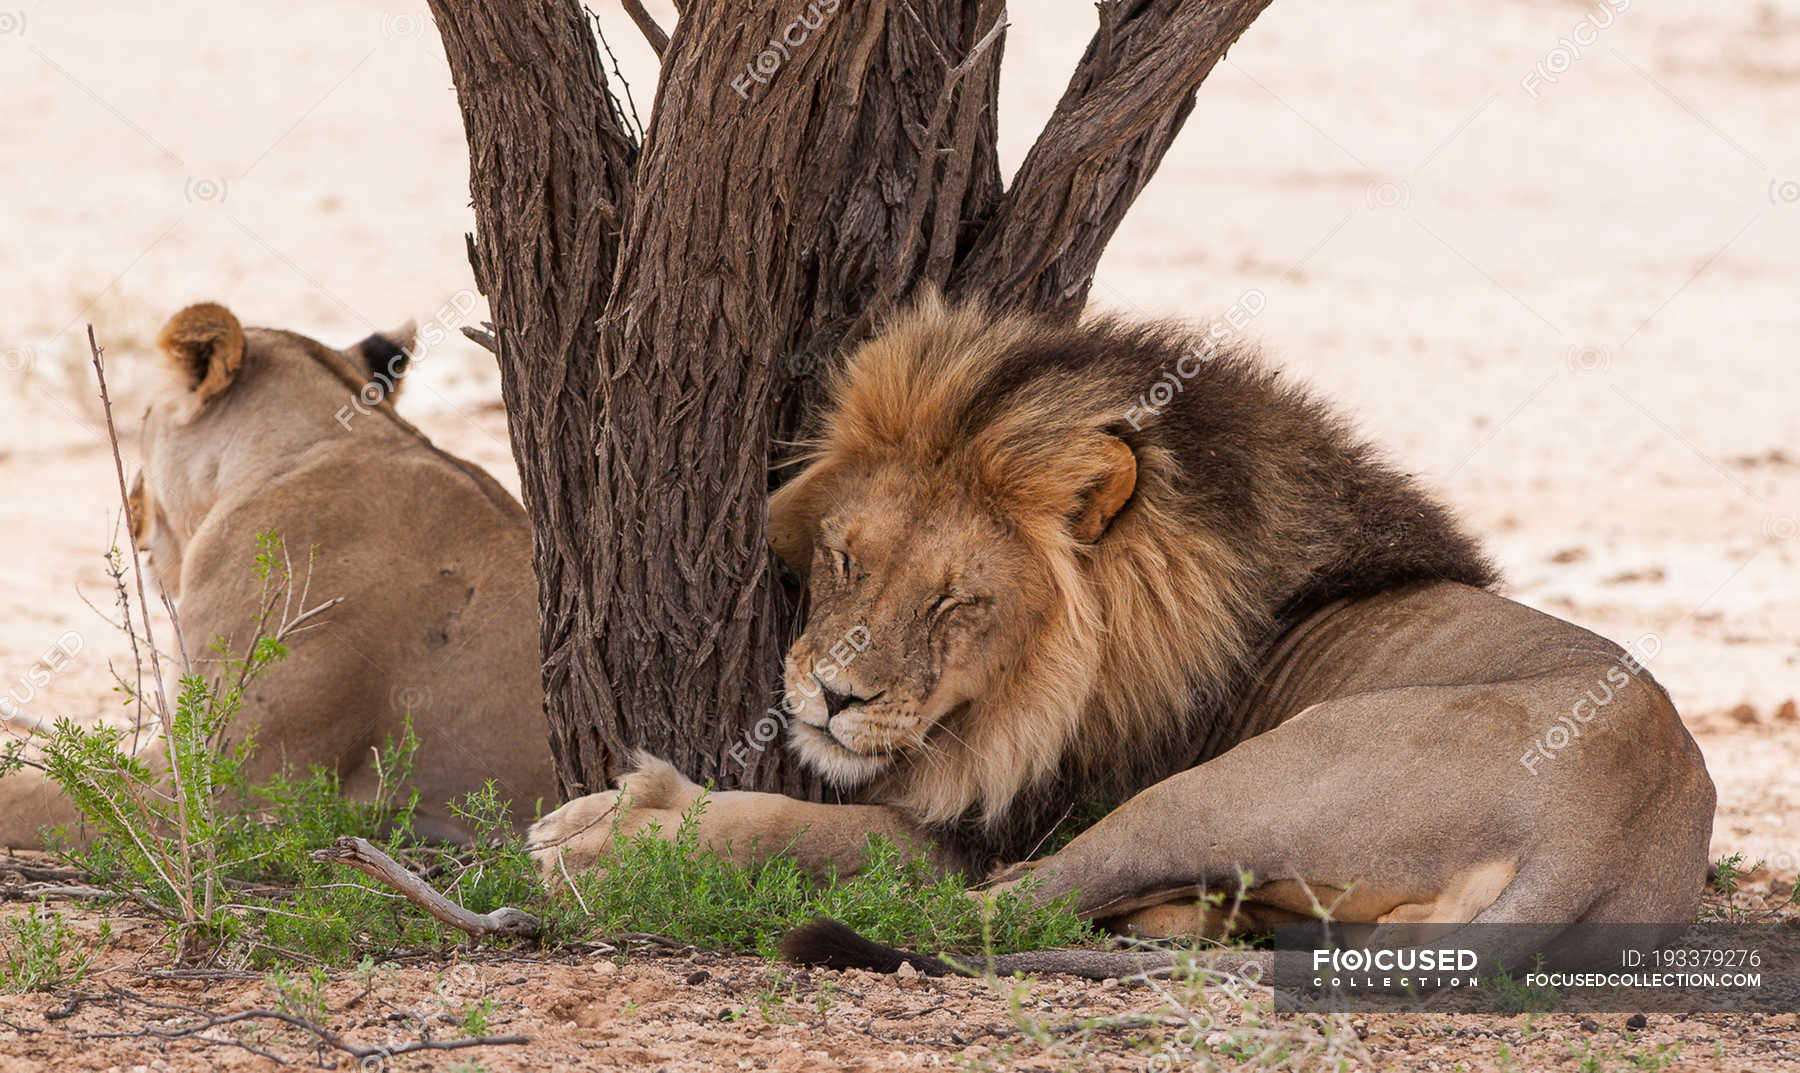 Cute, funny and fluffy lions resting by tree, lion hugging trunk — Non  Urban Scene, tree trunk - Stock Photo | #193379276